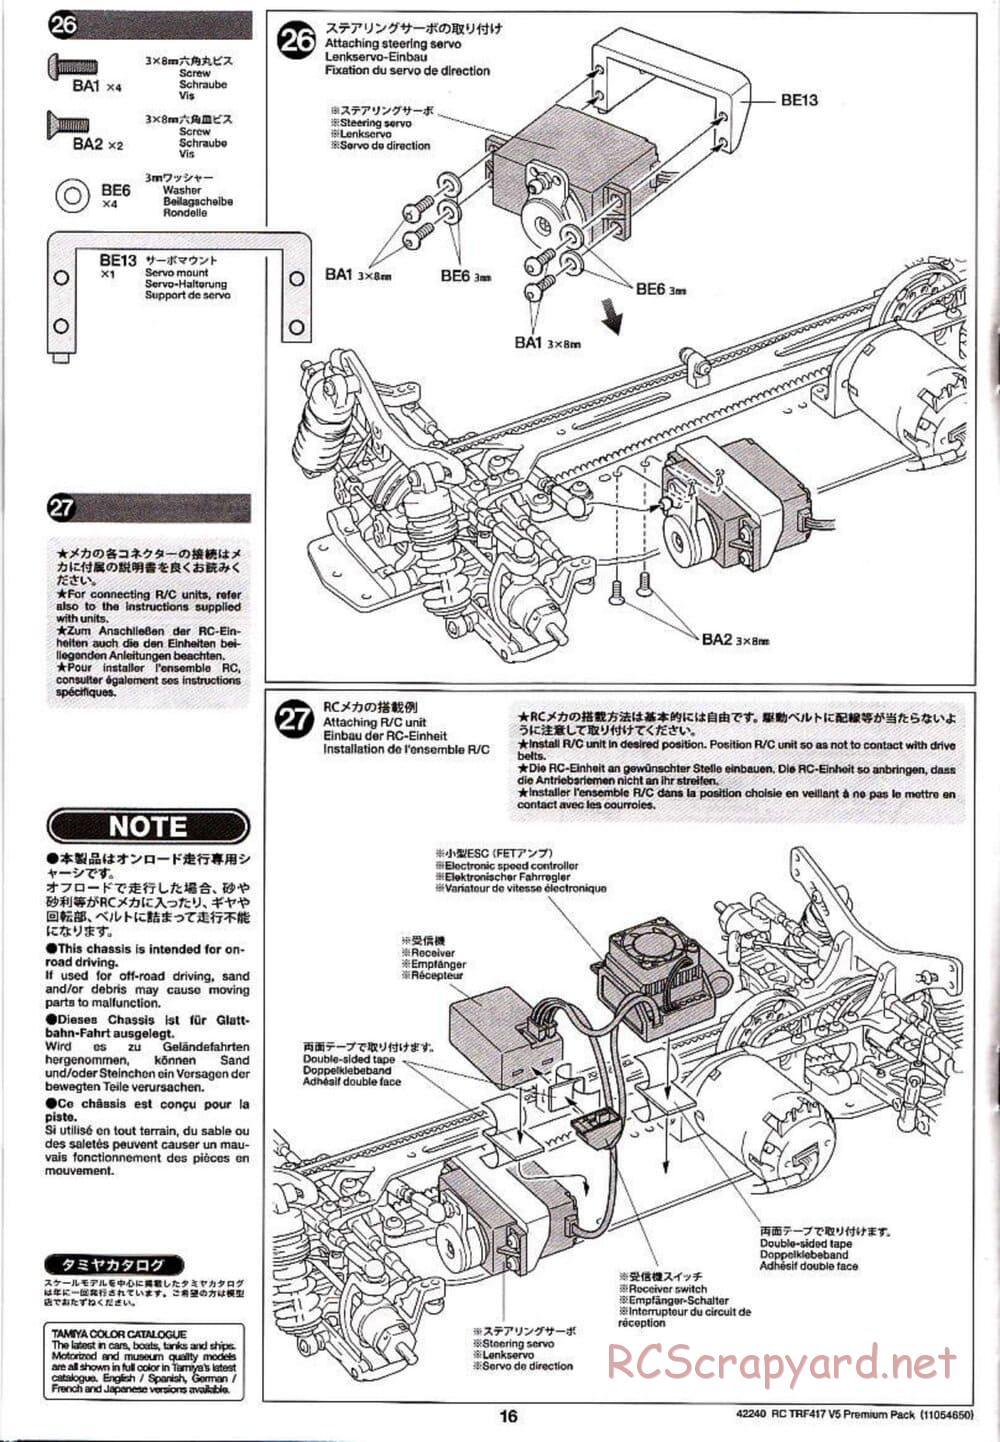 Tamiya - TRF417 V5 Premium Package Chassis - Manual - Page 16